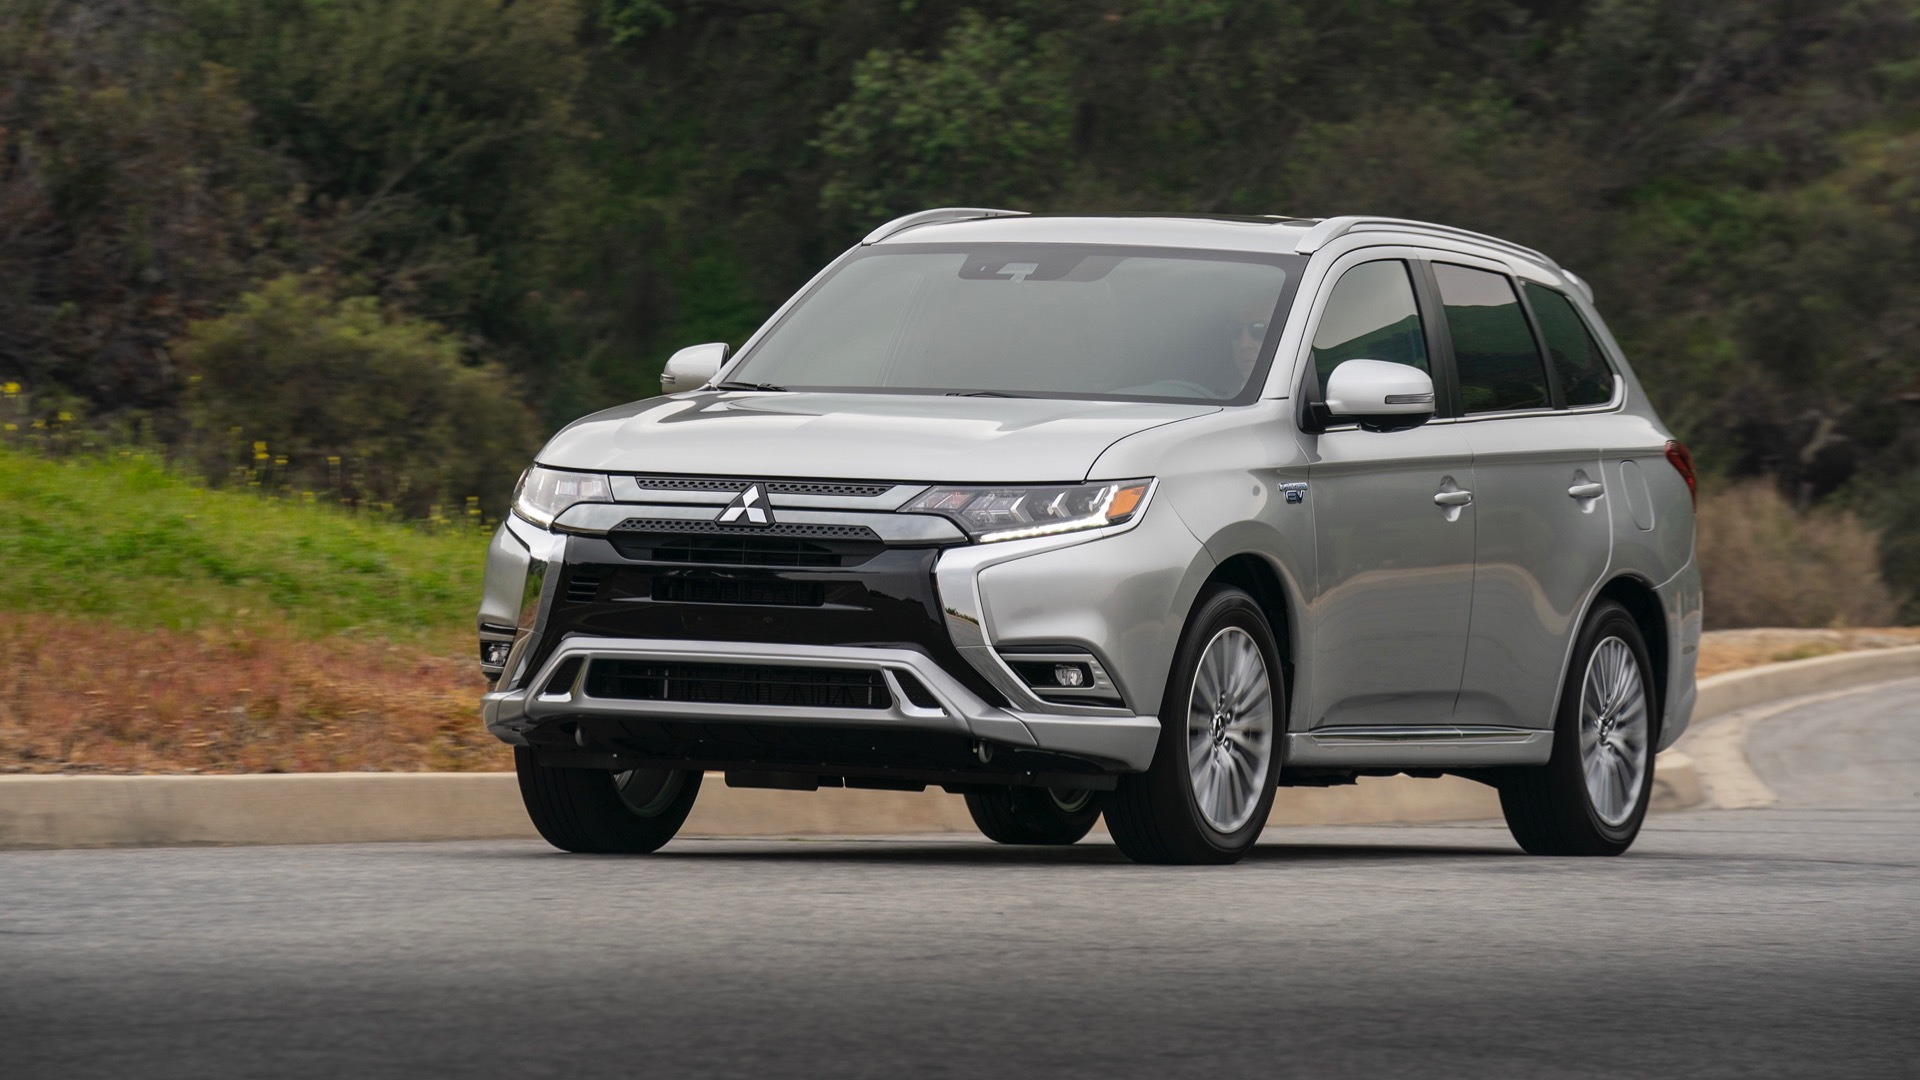 2021 Mitsubishi Outlander Plug-In Hybrid: 24 electric miles, and quicker